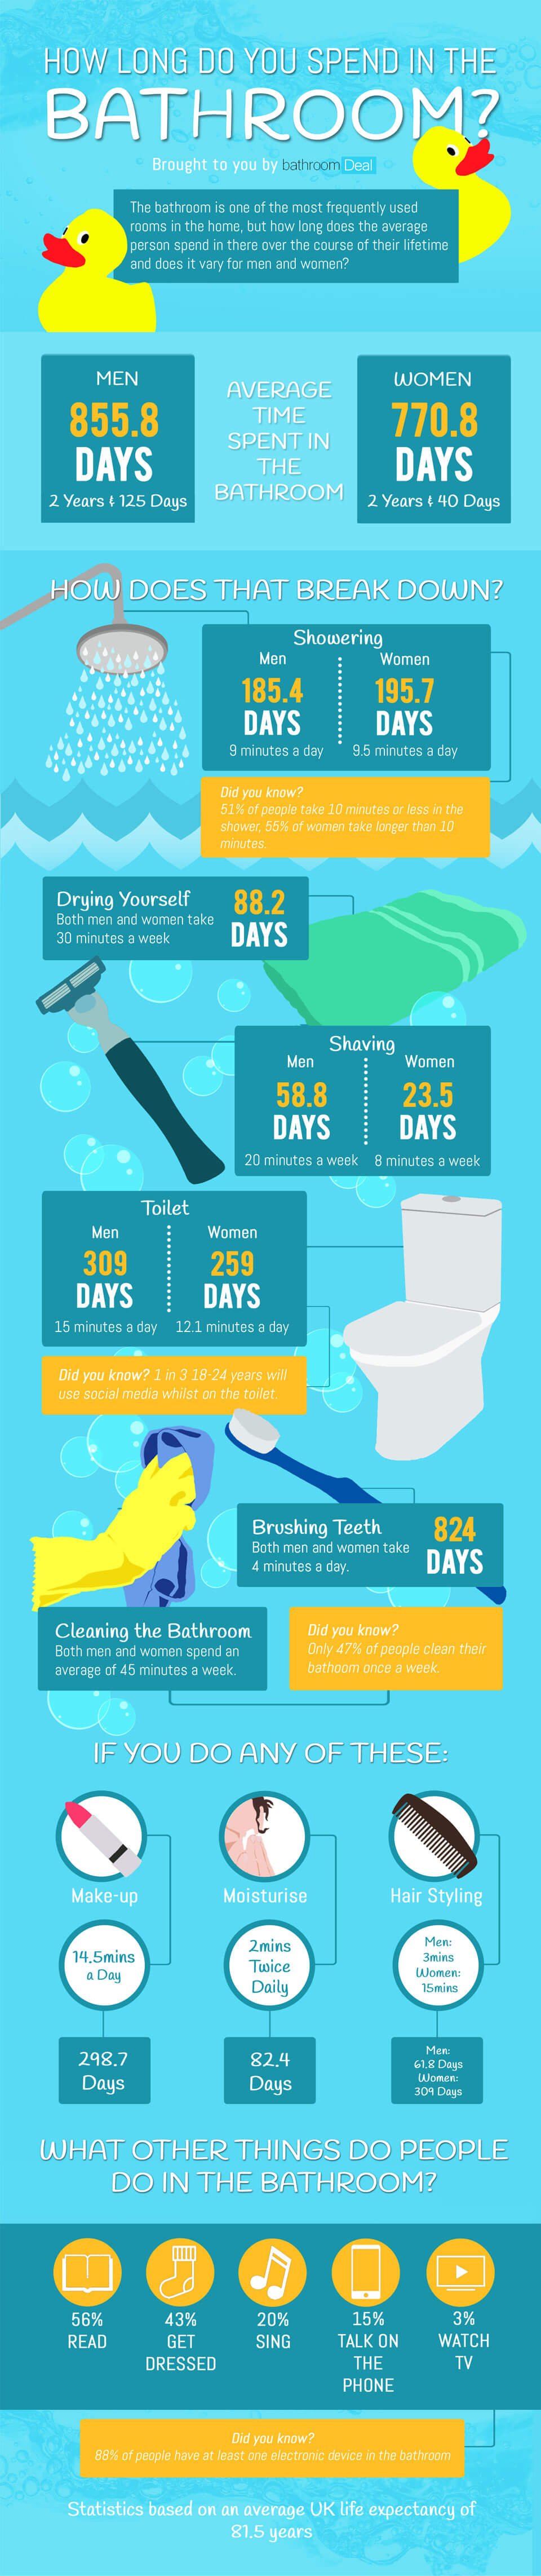 How long you spend in the Bathroom